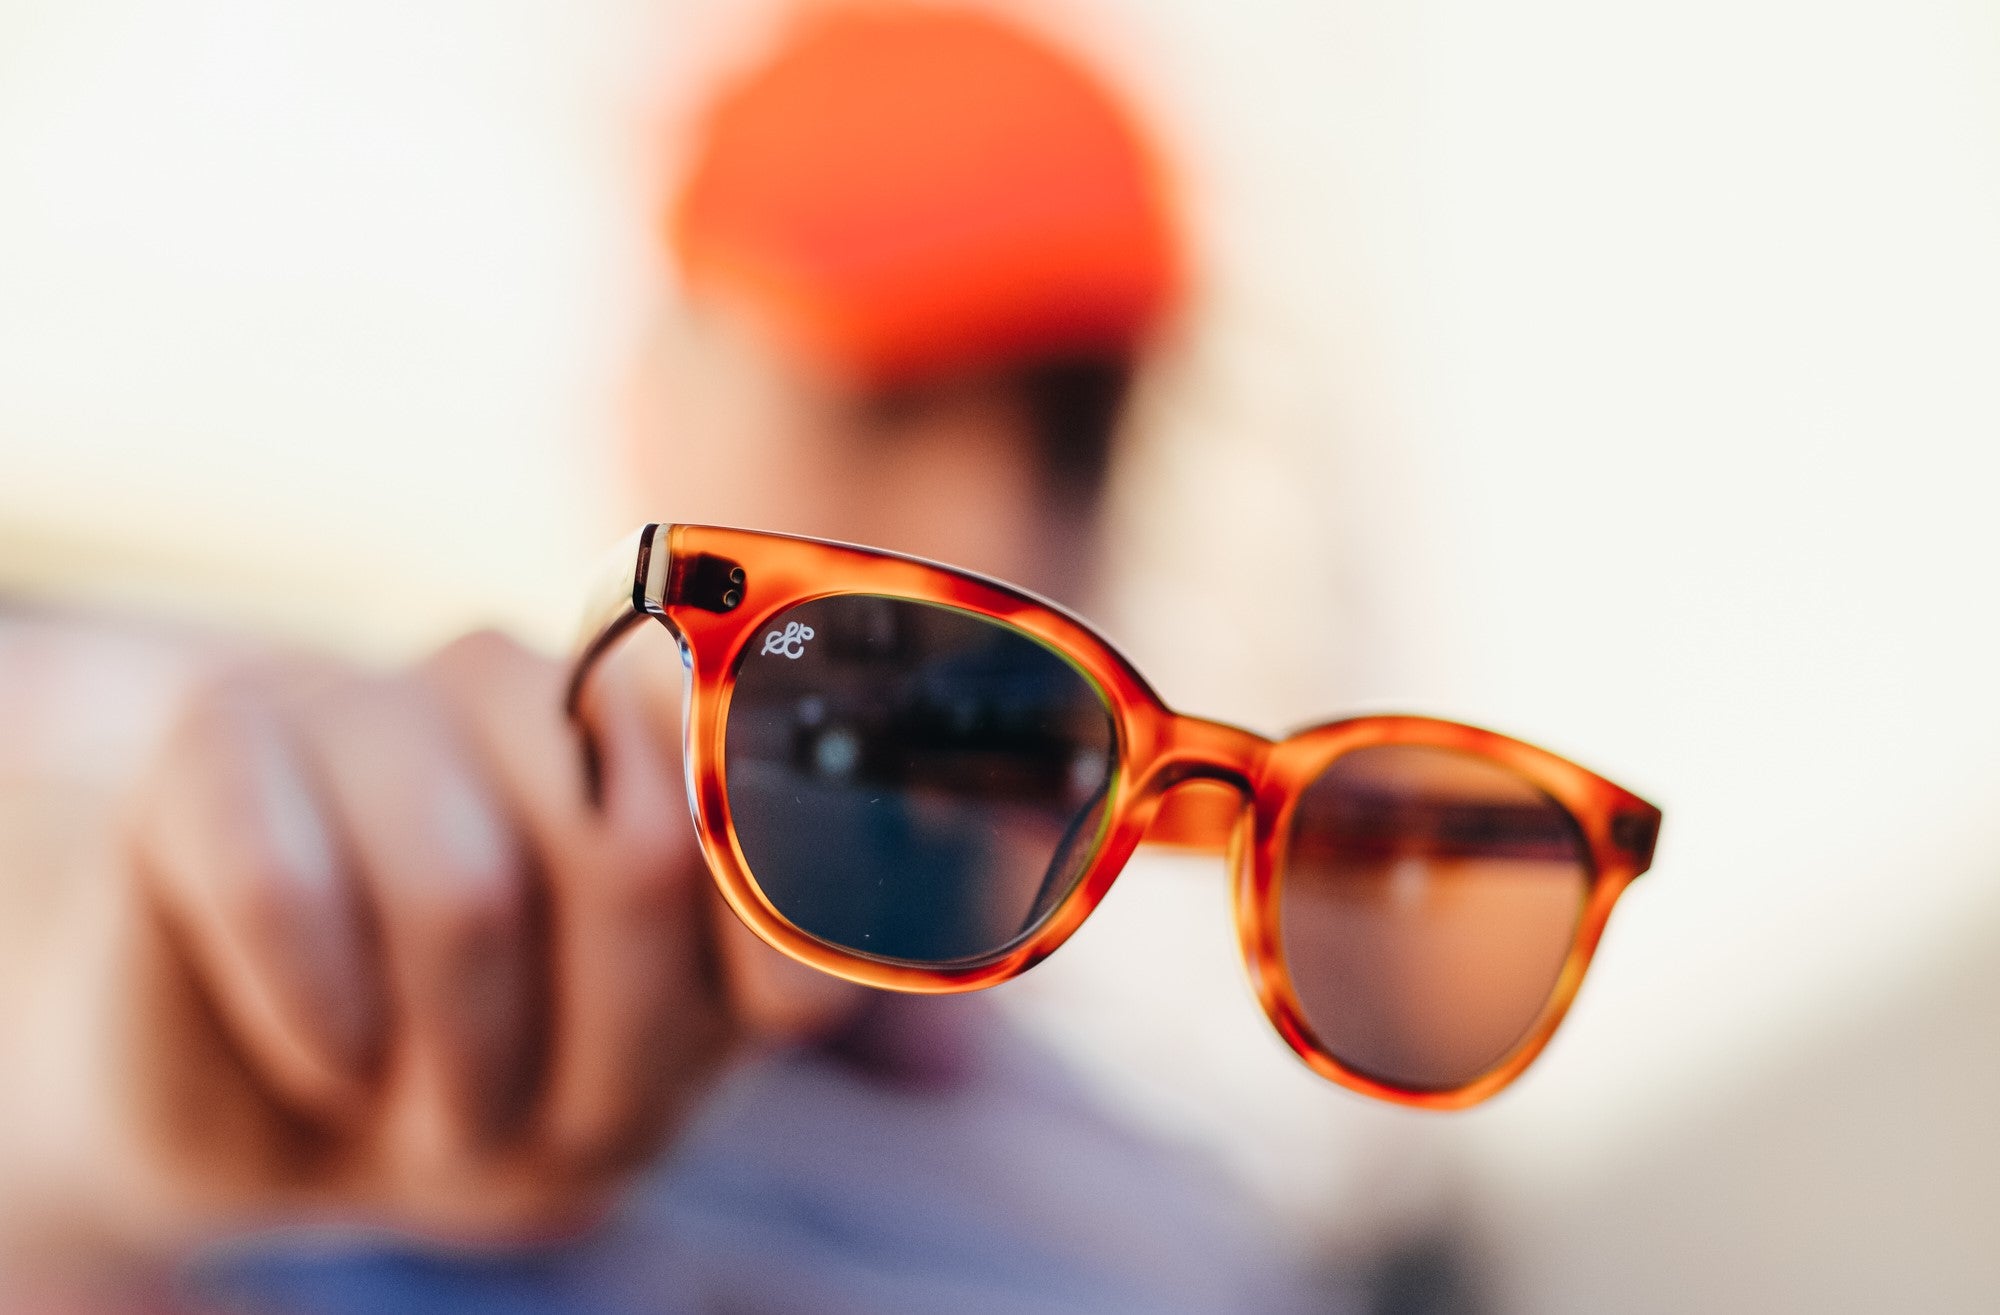 6 Top Tips You Must Know To Take Care of Your Sunglasses - The Right Way